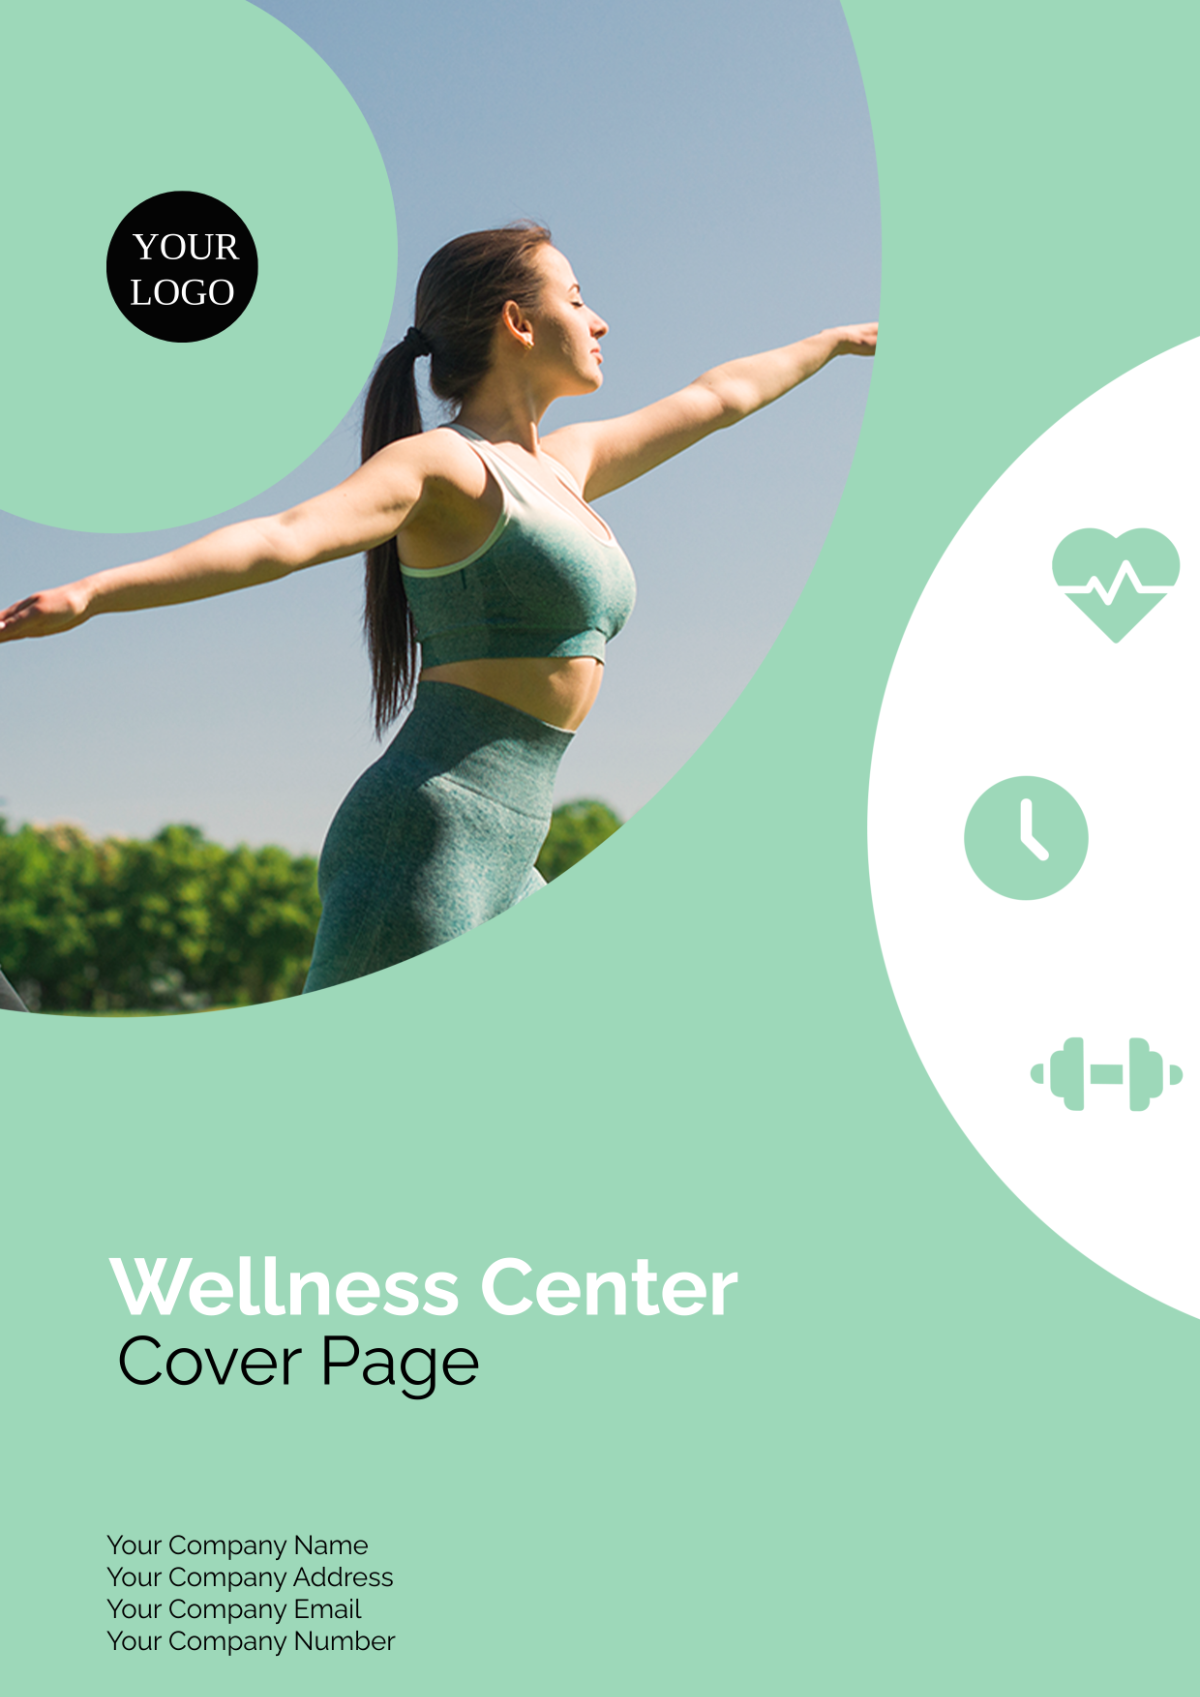 Wellness Center Cover Page Address